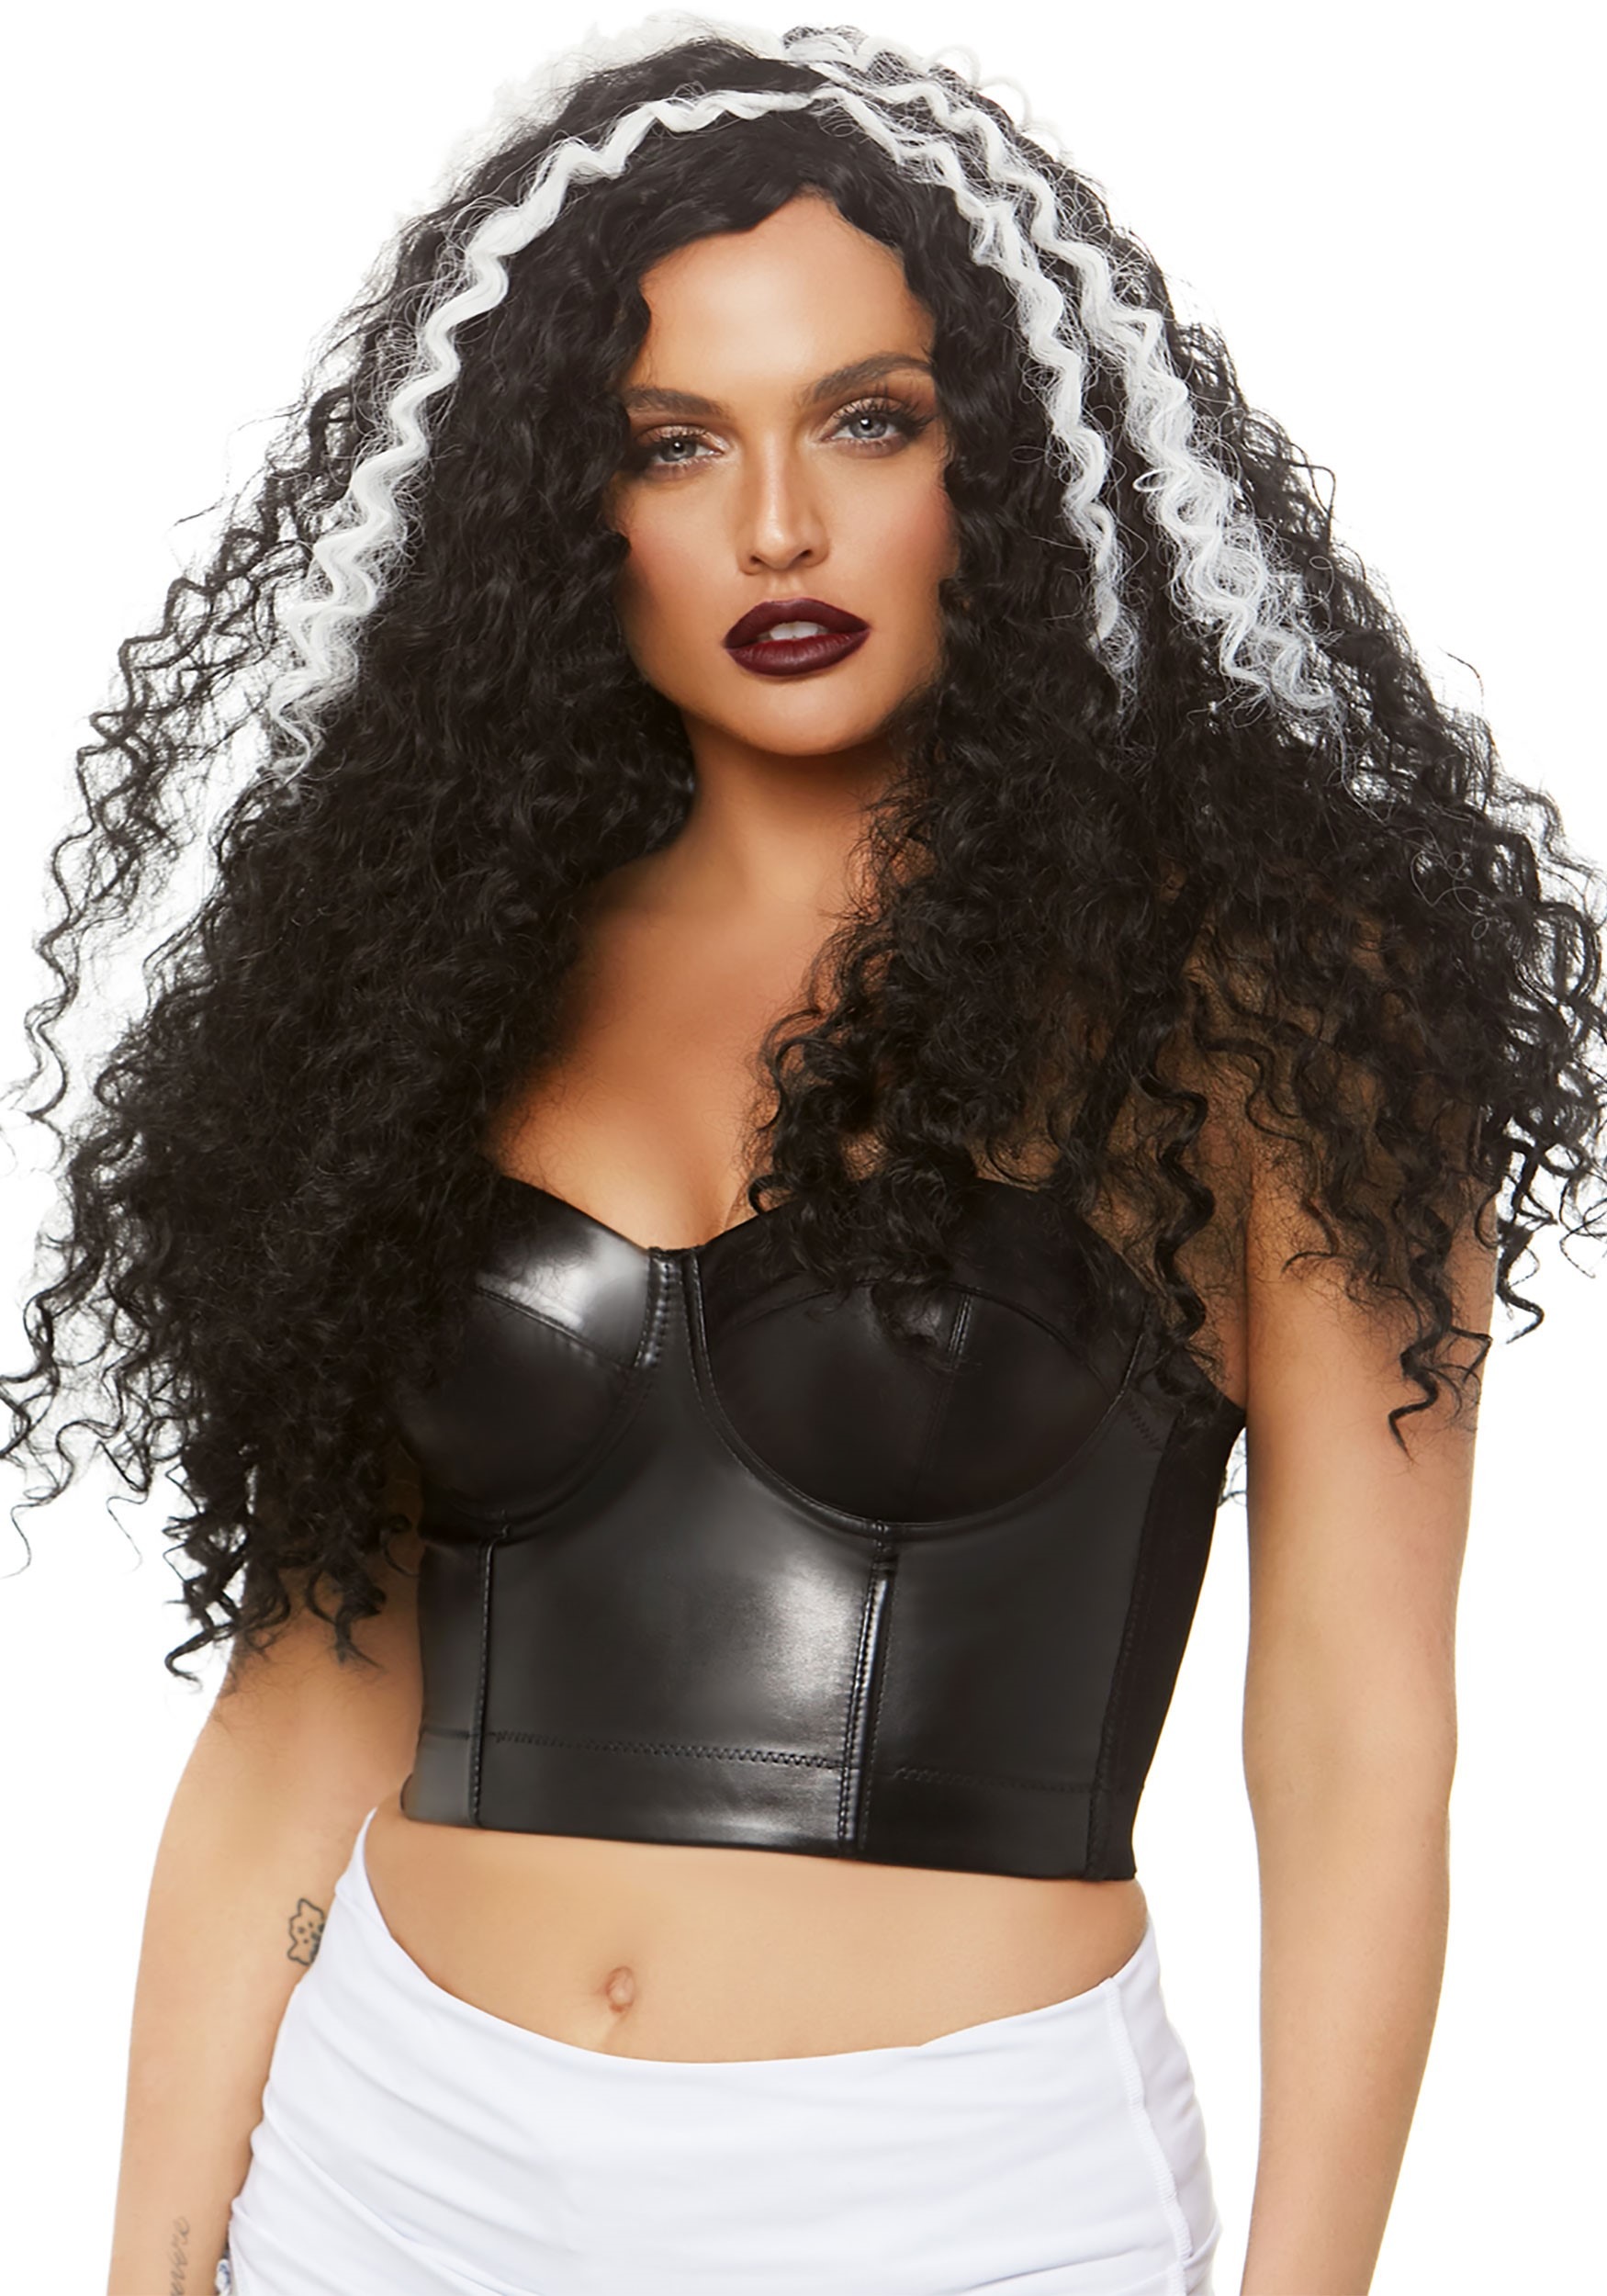 Women’s Long Curly Black and White Wig